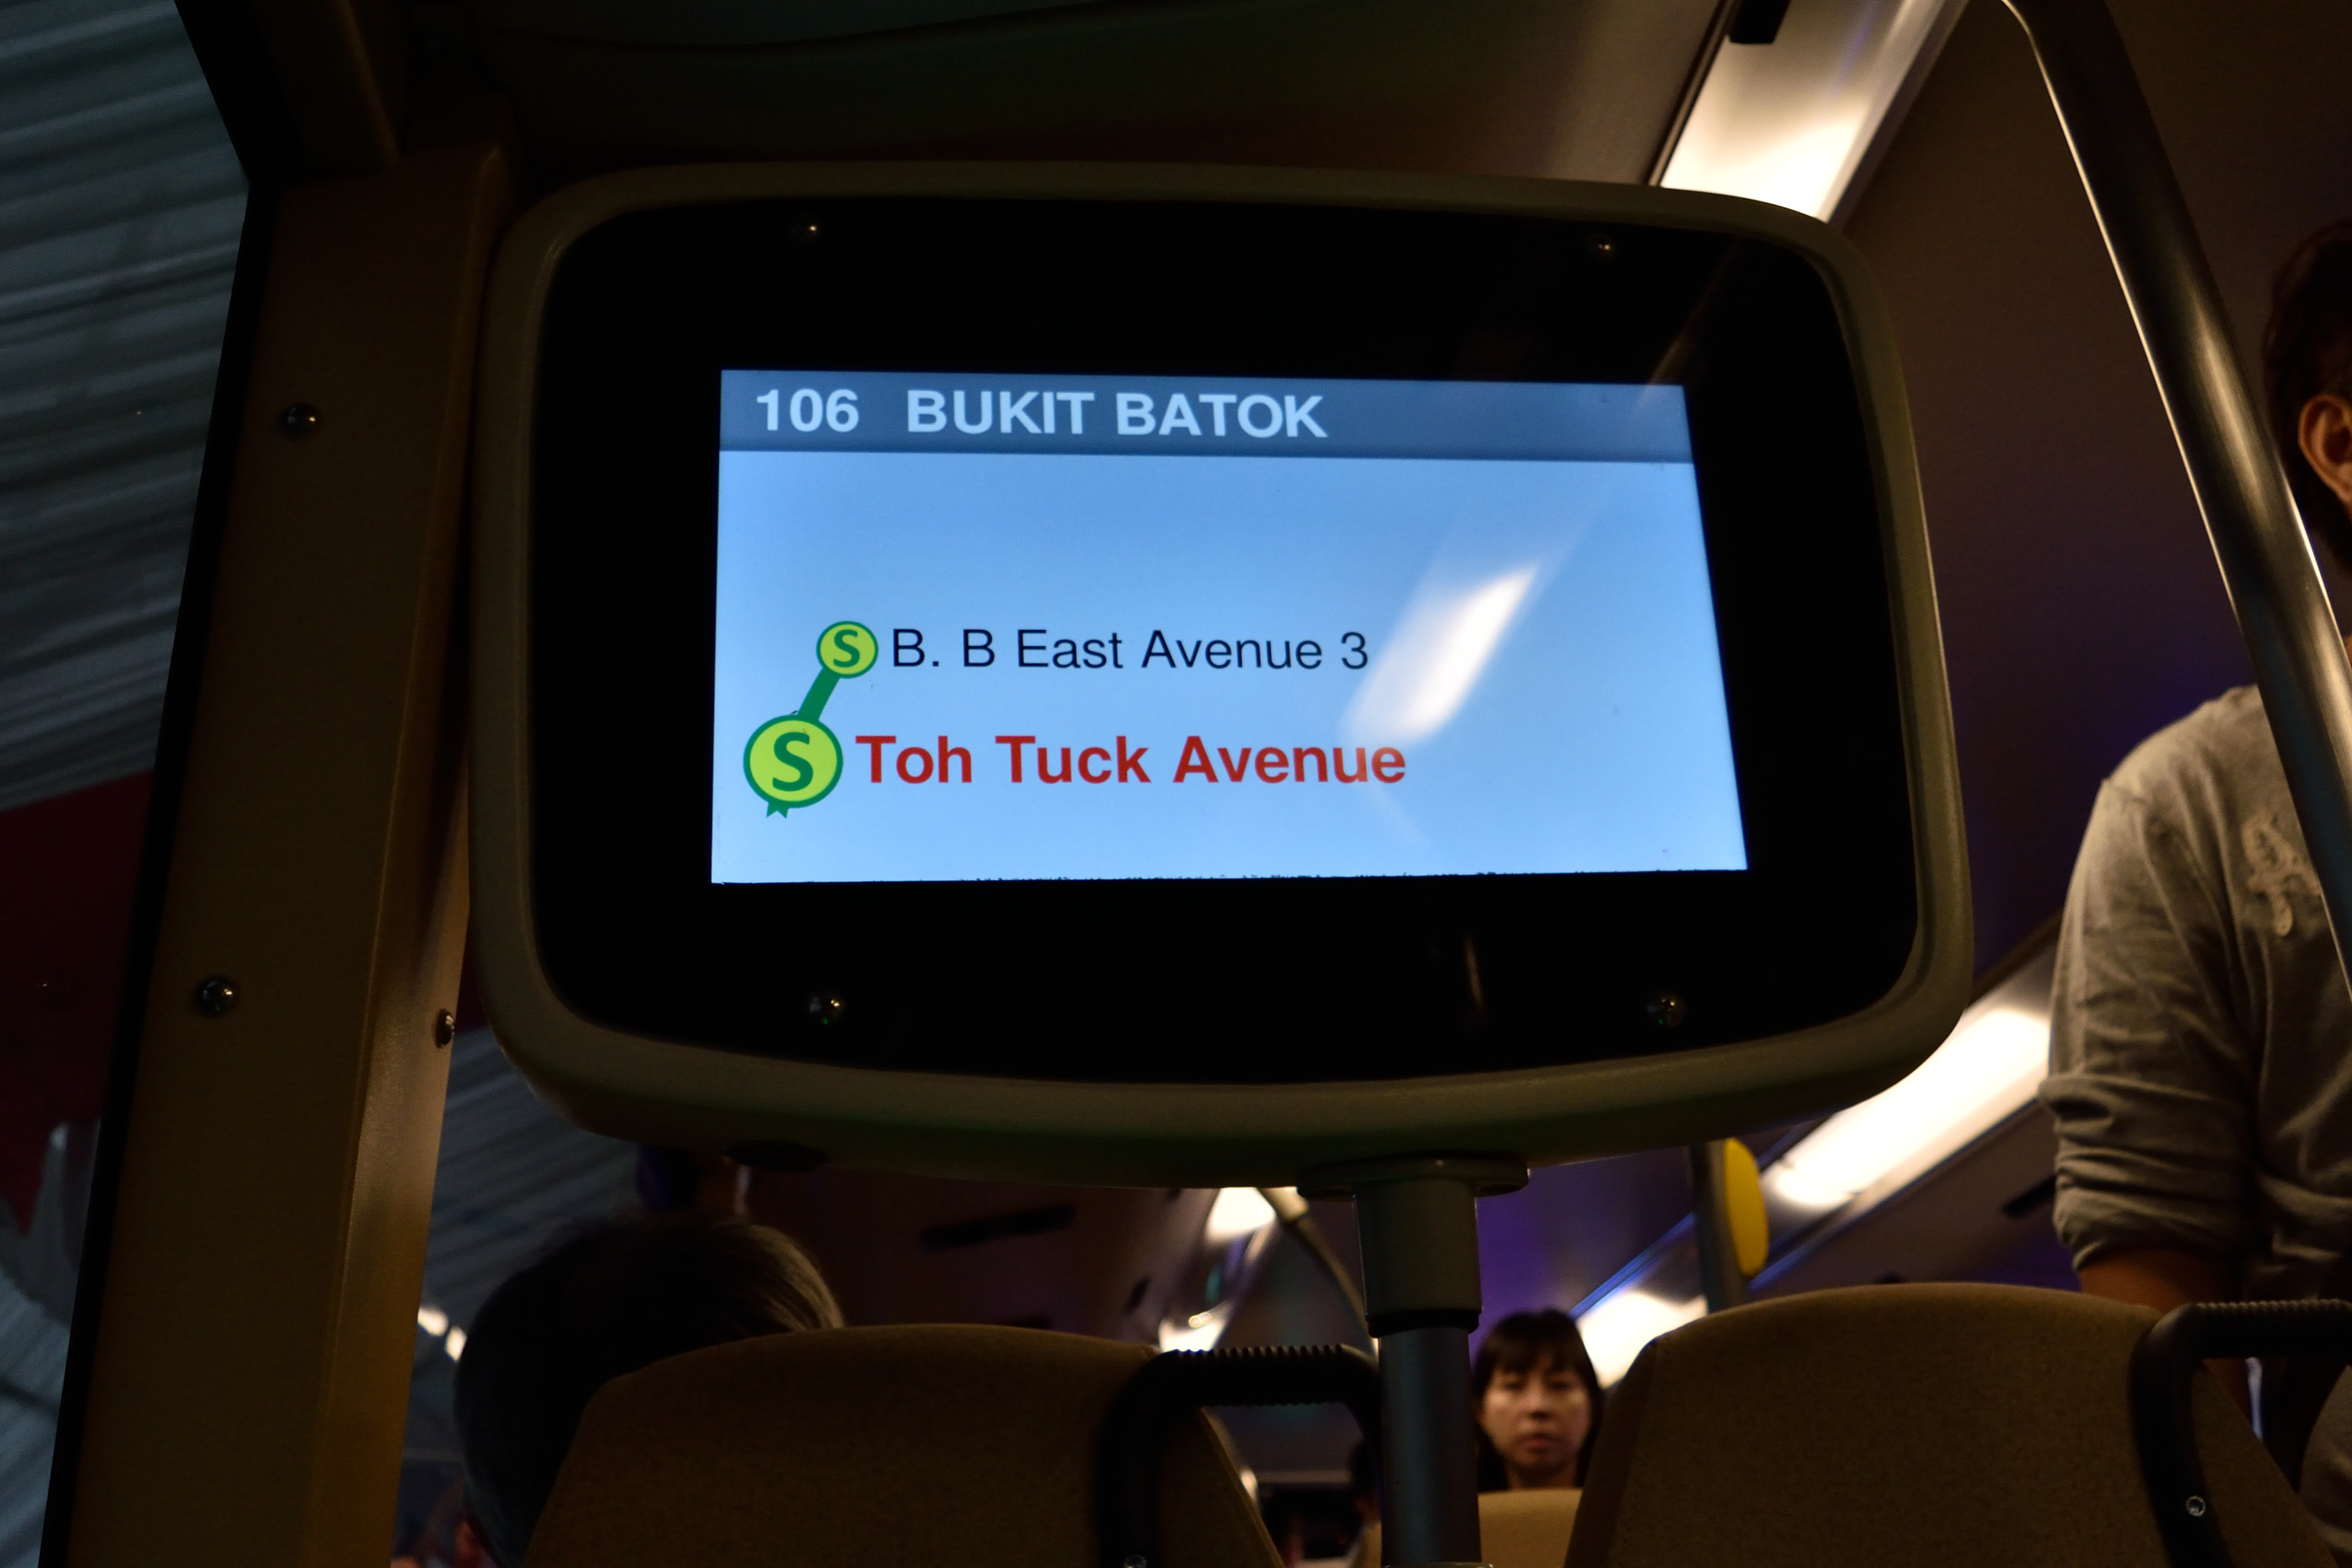 Bus route display.